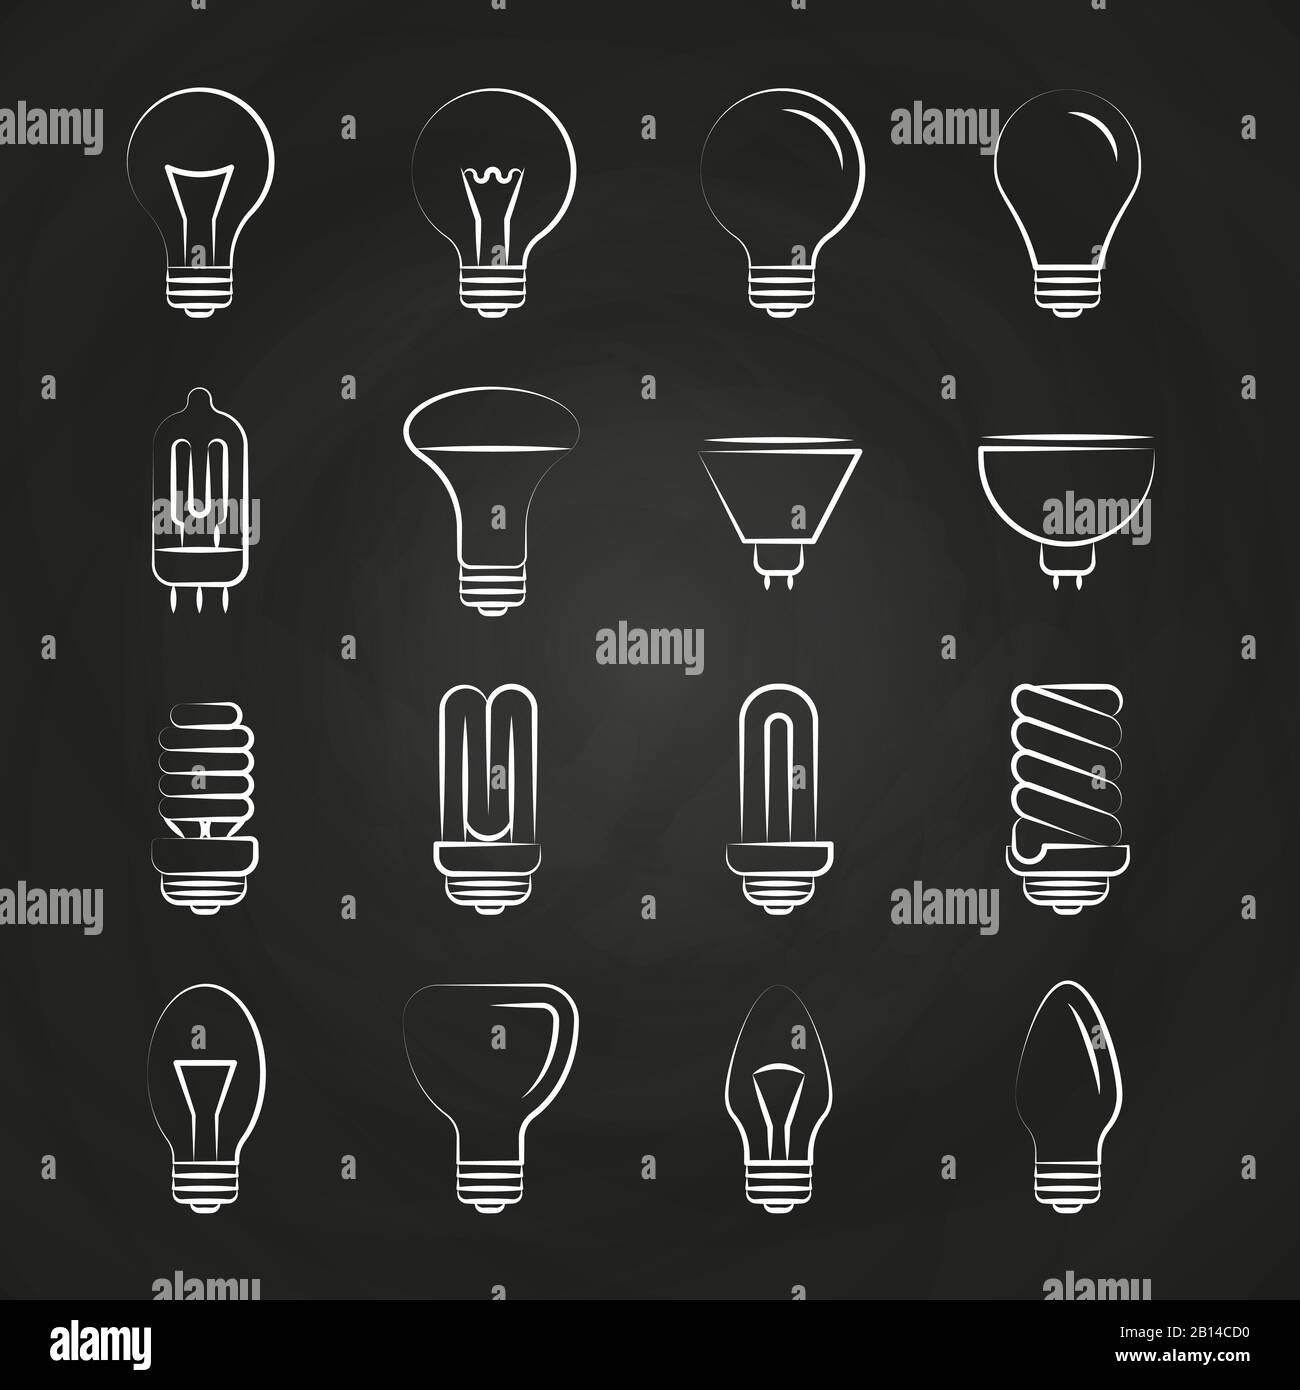 Light bulbs hand drawn icons on chalkboard. Sketch icon lamp. Vector illustration Stock Vector